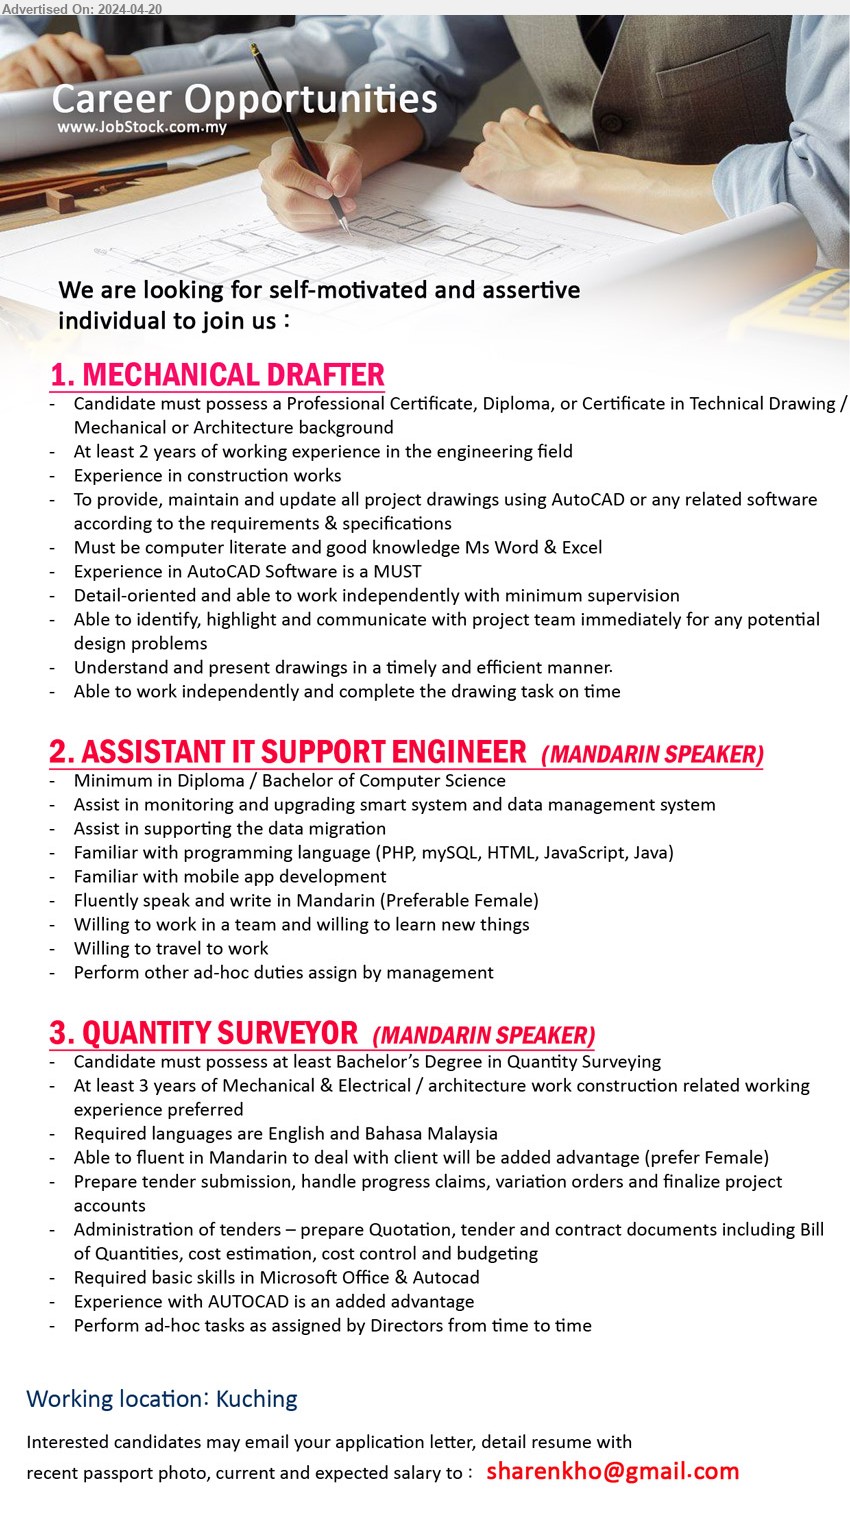 ADVERTISER - 1. MECHANICAL DRAFTER (Kuching), Professional Certificate, Diploma, or Certificate in Technical Drawing / Mechanical or Architecture background,...
2. ASSISTANT IT SUPPORT ENGINEER  (Kuching), Diploma / Bachelor of Computer Science, Familiar with programming language (PHP, mySQL, HTML, JavaScript, Java),...
3. QUANTITY SURVEYOR  (Kuching), Bachelor’s Degree in Quantity Surveying,  3 years of Mechanical & Electrical / Architecture work construction ...
Email resume to ...